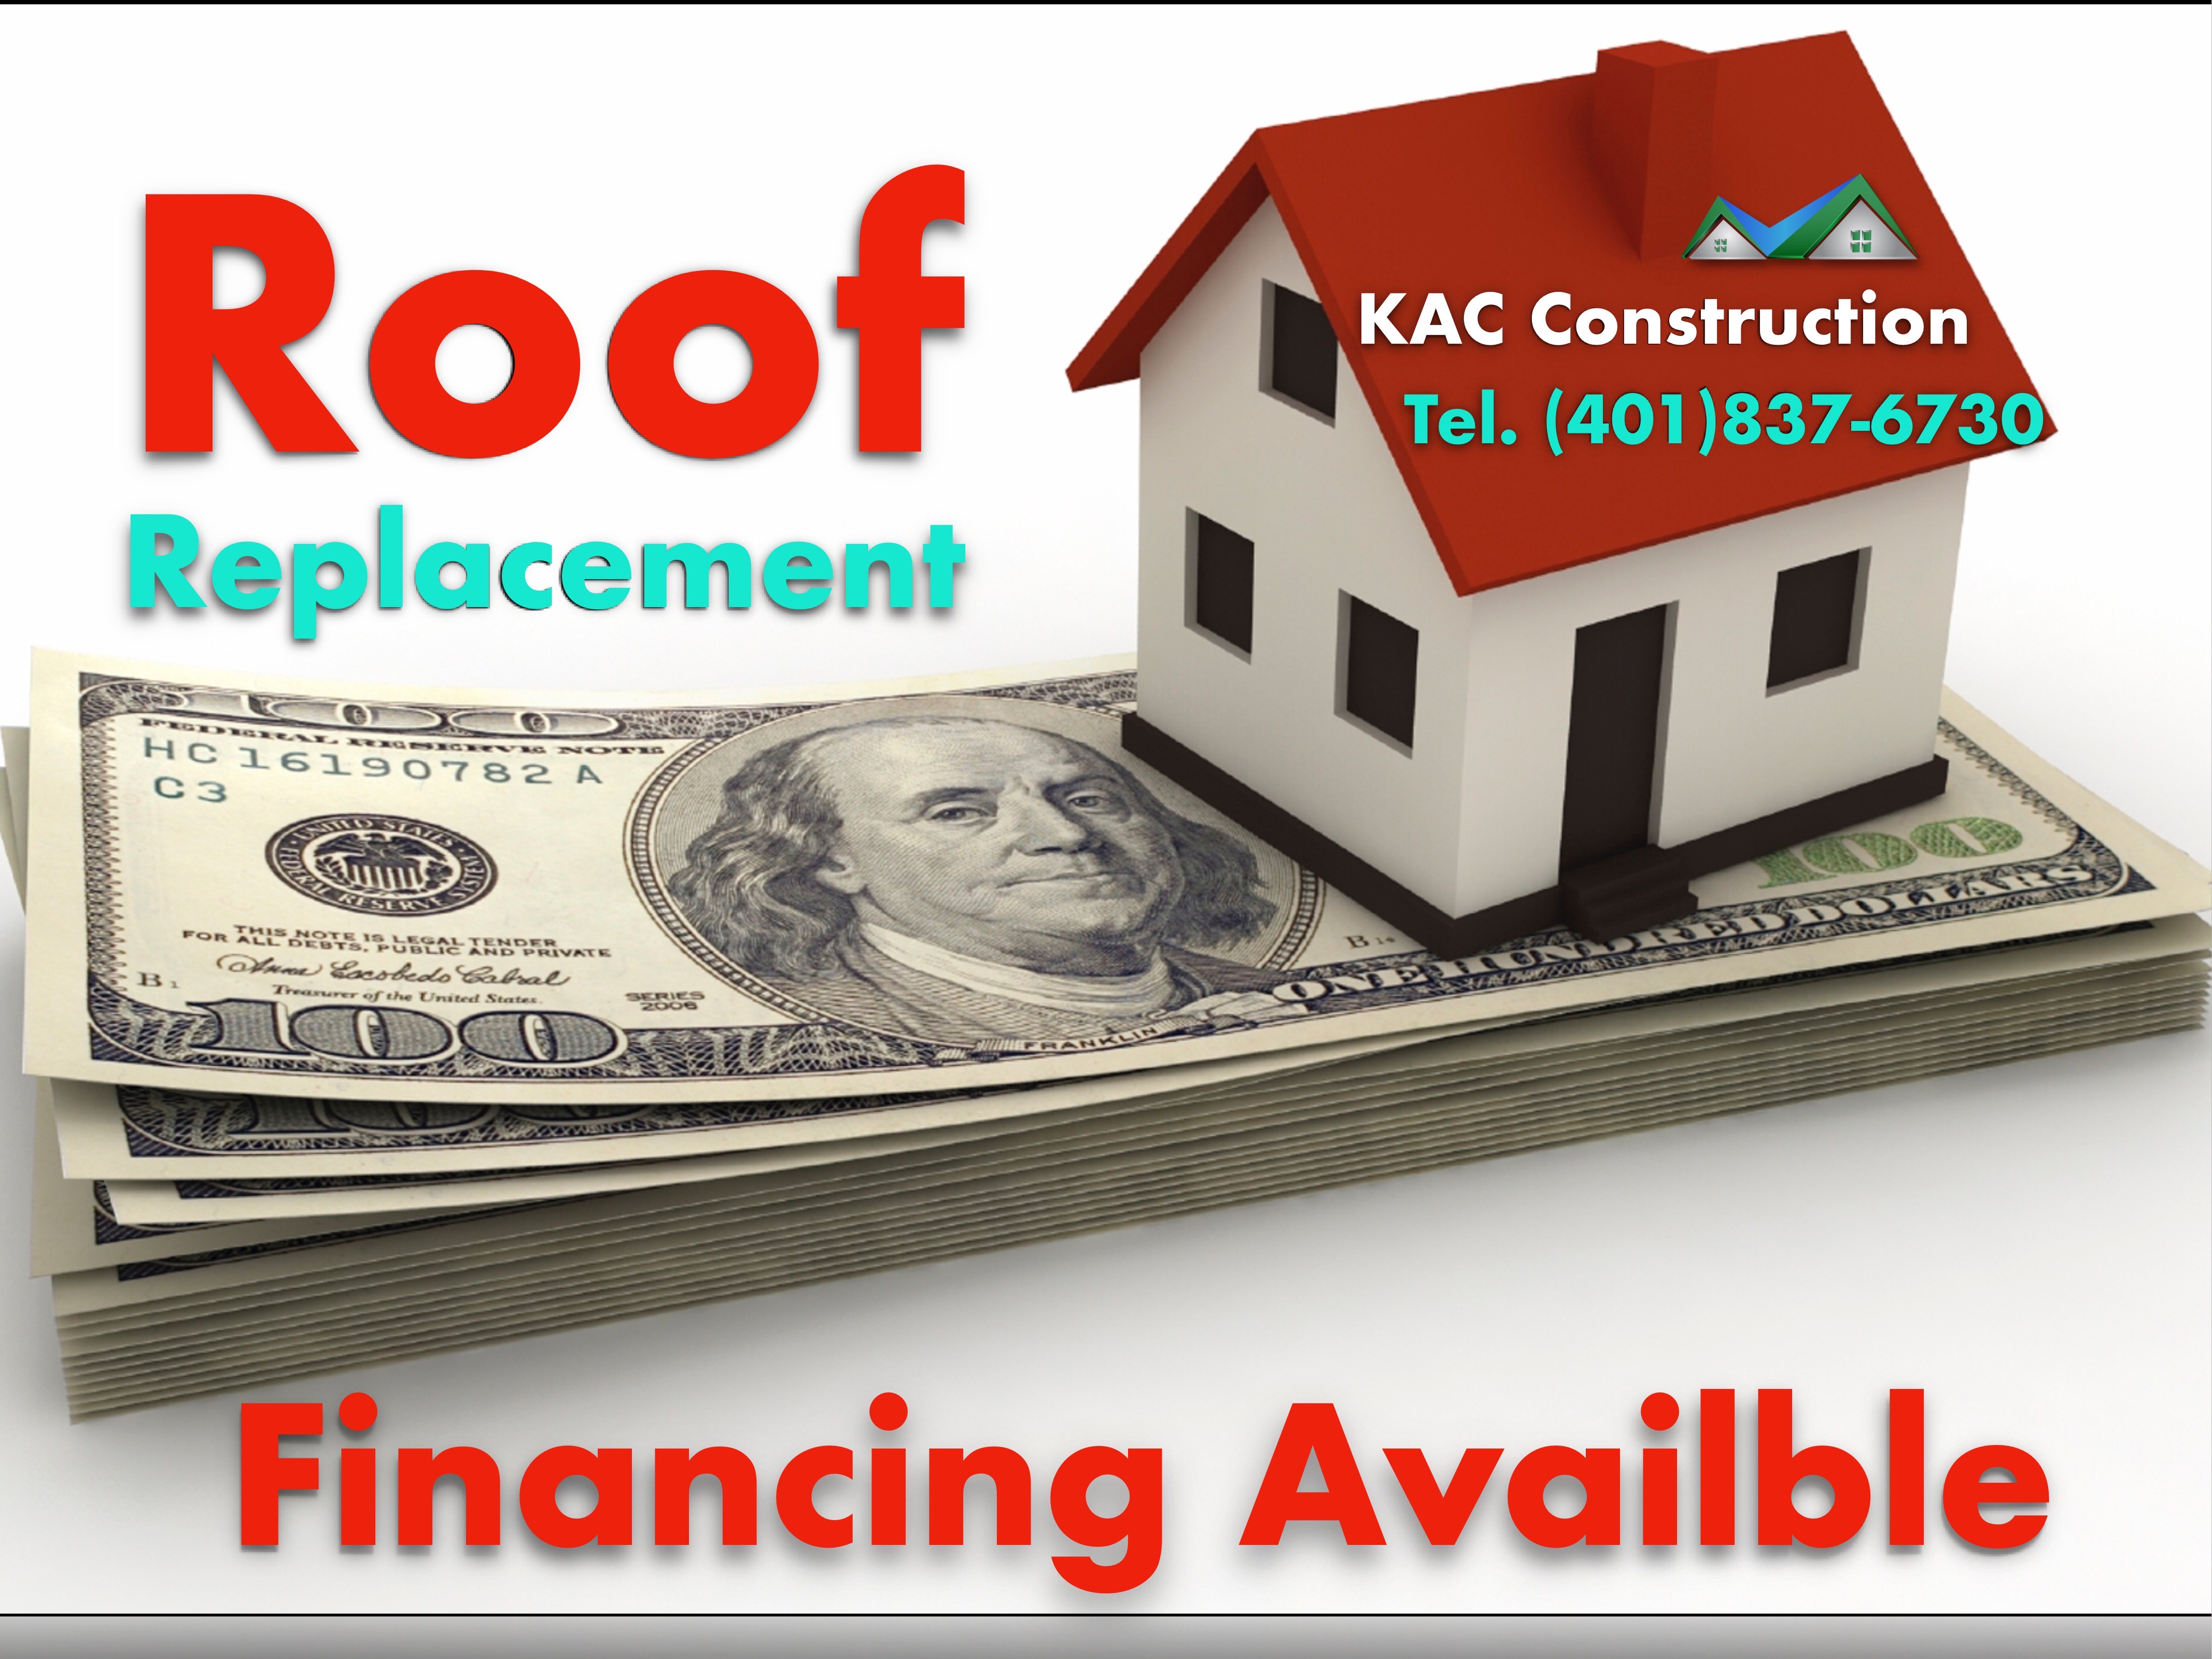 financing roof replacement, financing roof replacement ri,financing roof replacement providence, financing roof replacement providence ri, roof replacement financing, roof replacement financing ri, roof replacement financing providence